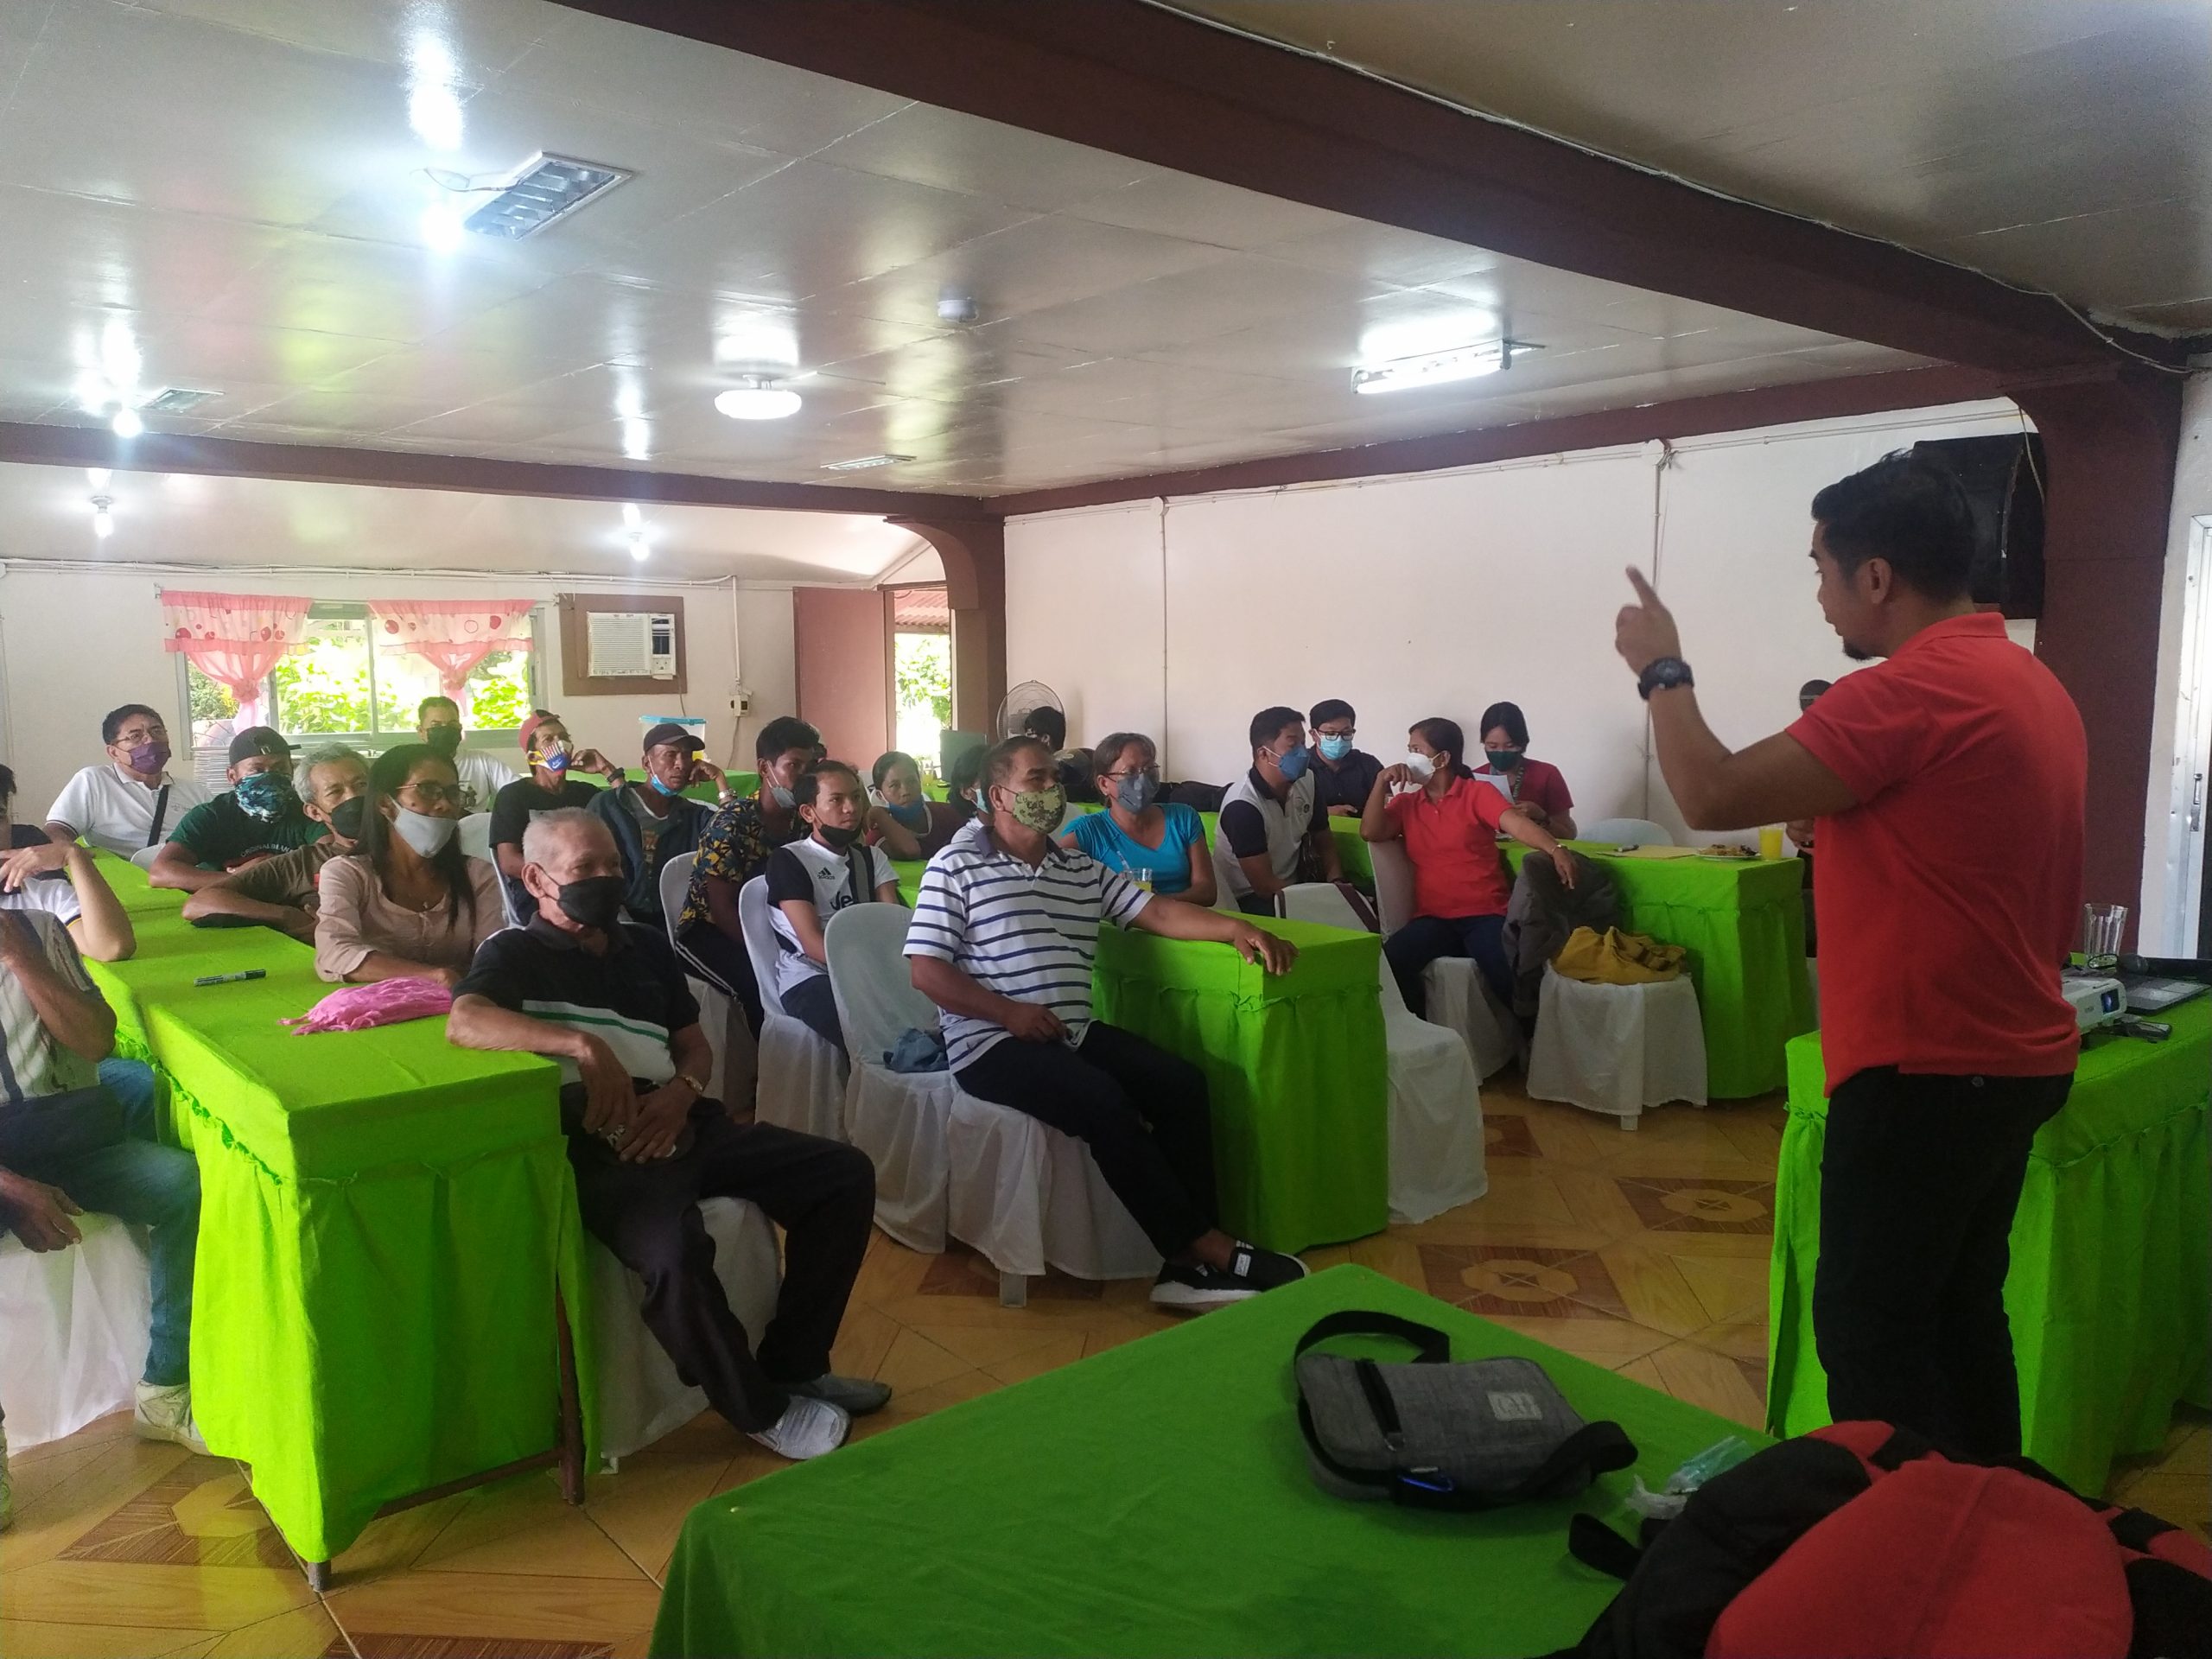 OccMin service provider associations receive training on machinery operations